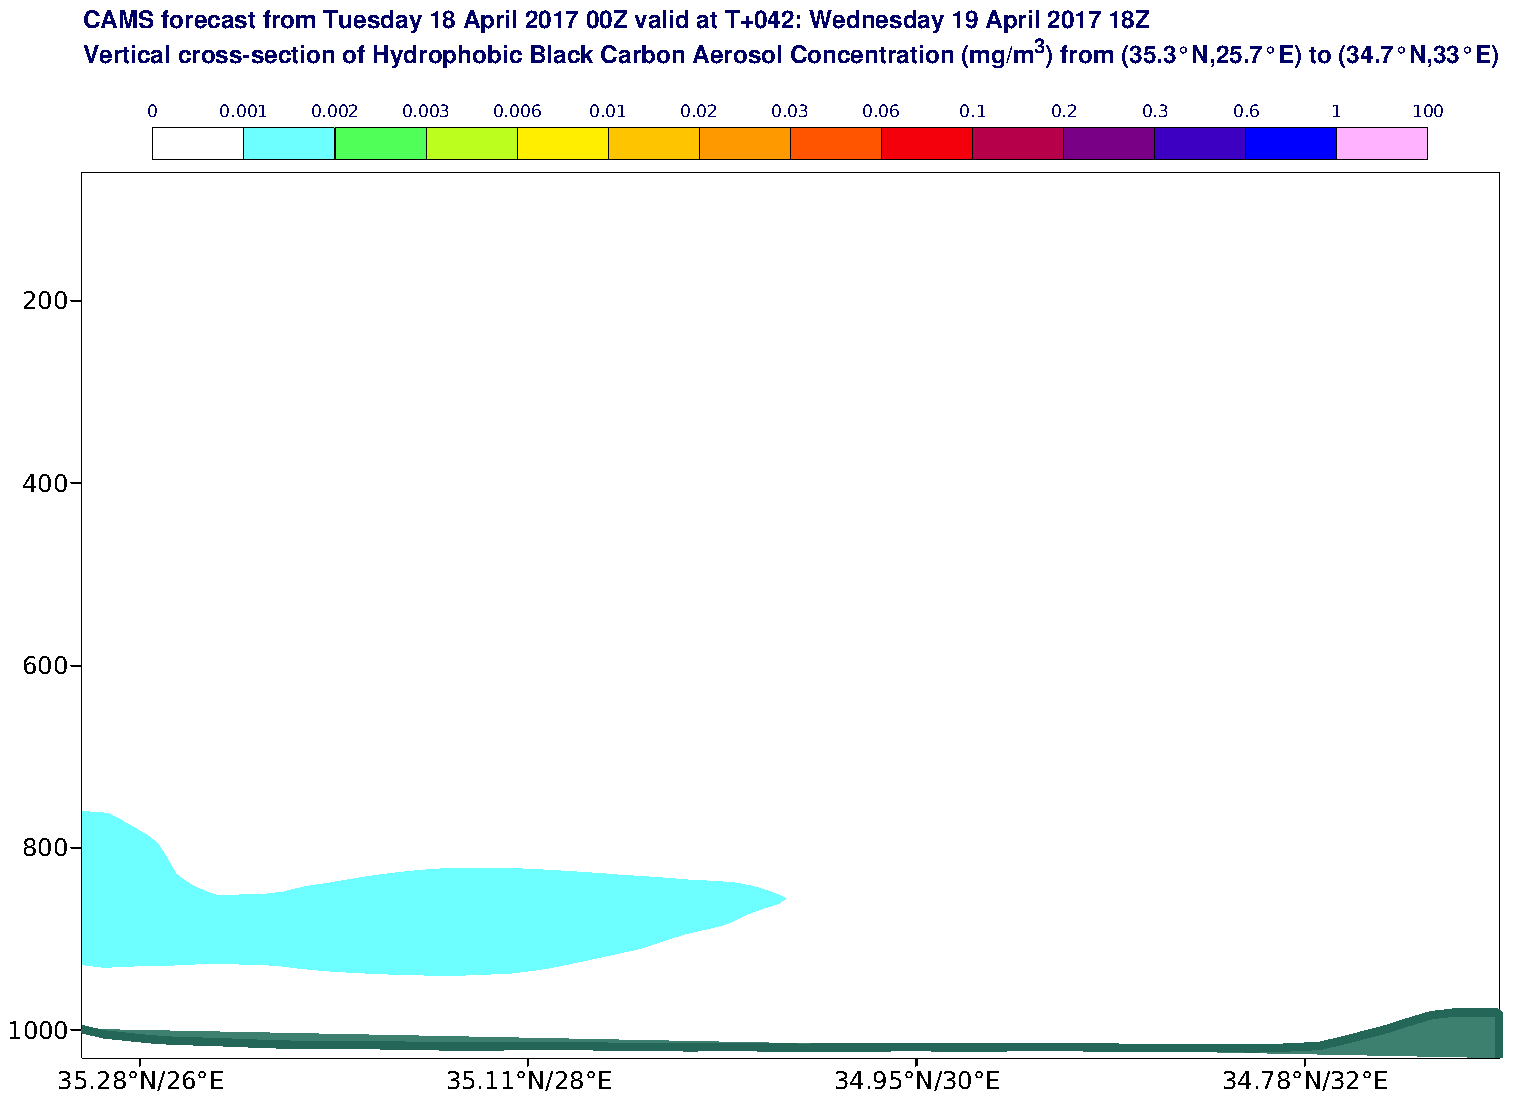 Vertical cross-section of Hydrophobic Black Carbon Aerosol Concentration (mg/m3) valid at T42 - 2017-04-19 18:00